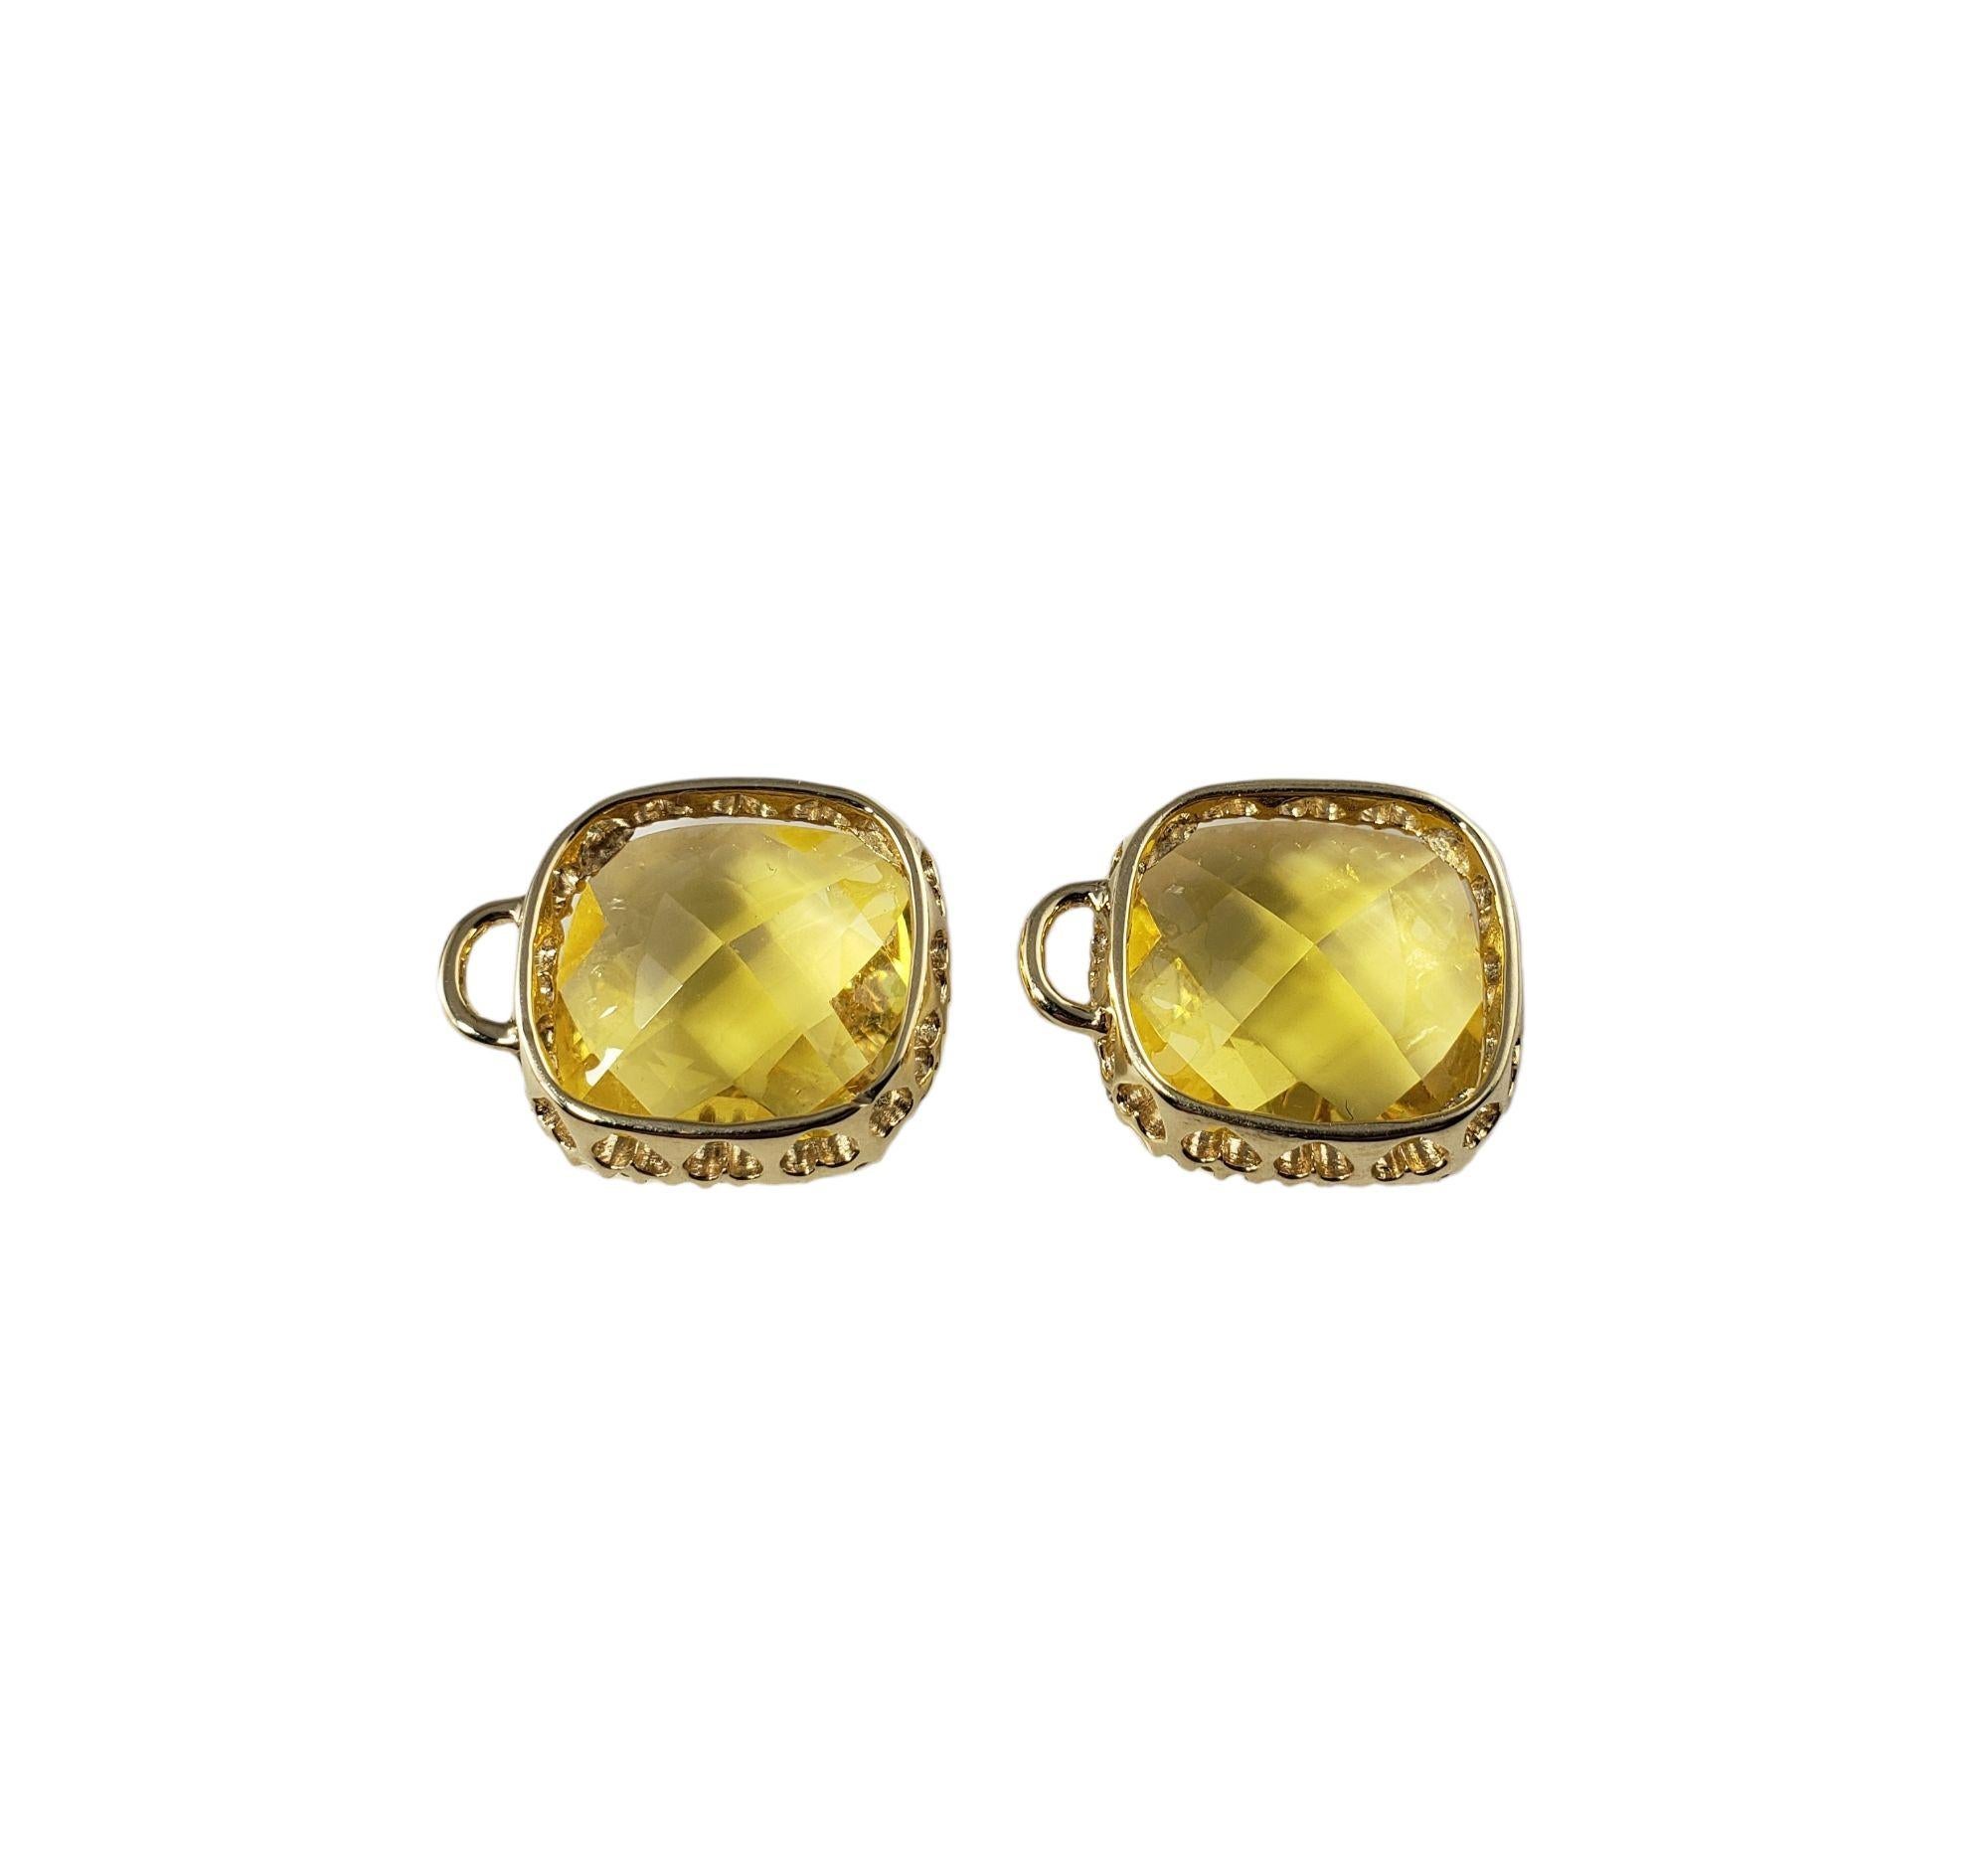 Vintage 14 Karat Yellow Gold Citrine and Diamond Earring Enhancers JAGi Certified-

These elegant earring enhancers each feature one square cushion cut citrine
(14 mm x 14 mm) and 36 round brilliant cut diamonds set in classic 14K yellow